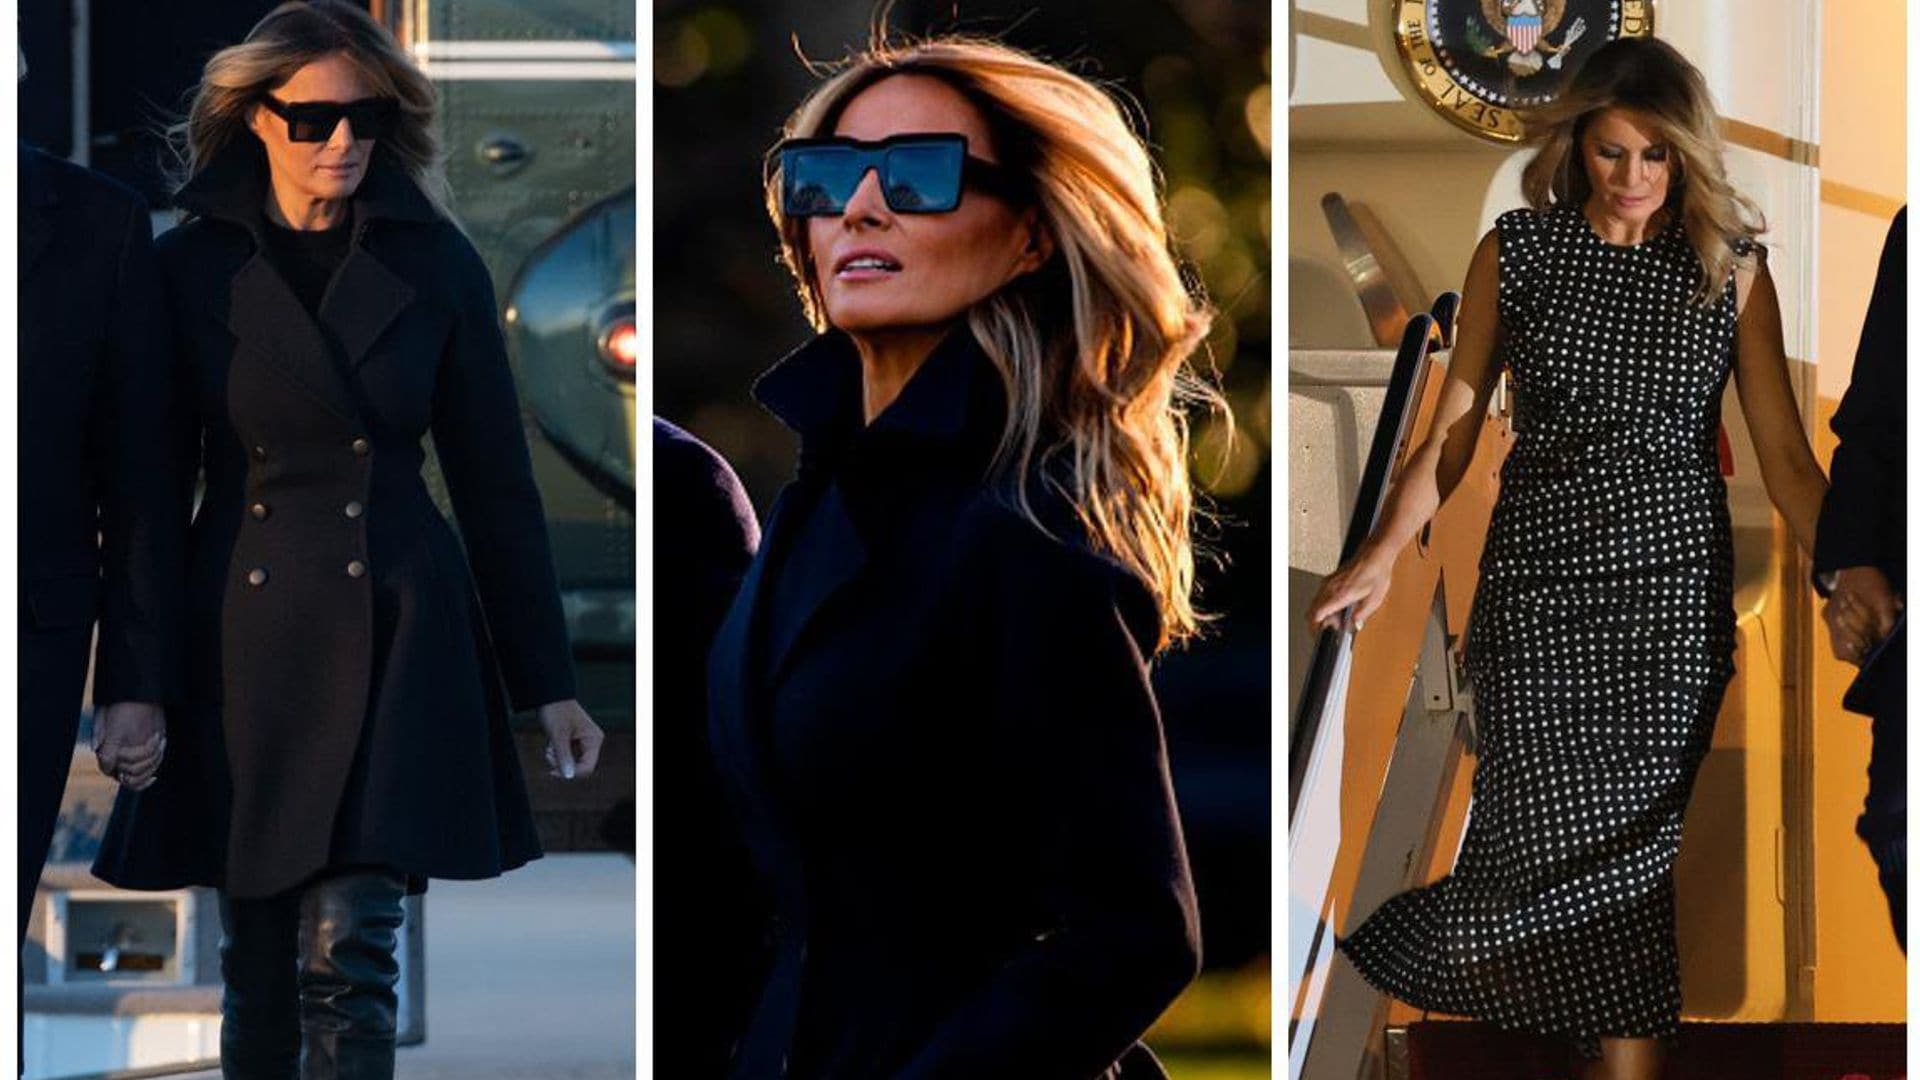 First Lady Melania Trump steps out in style for her Christmas Vacation